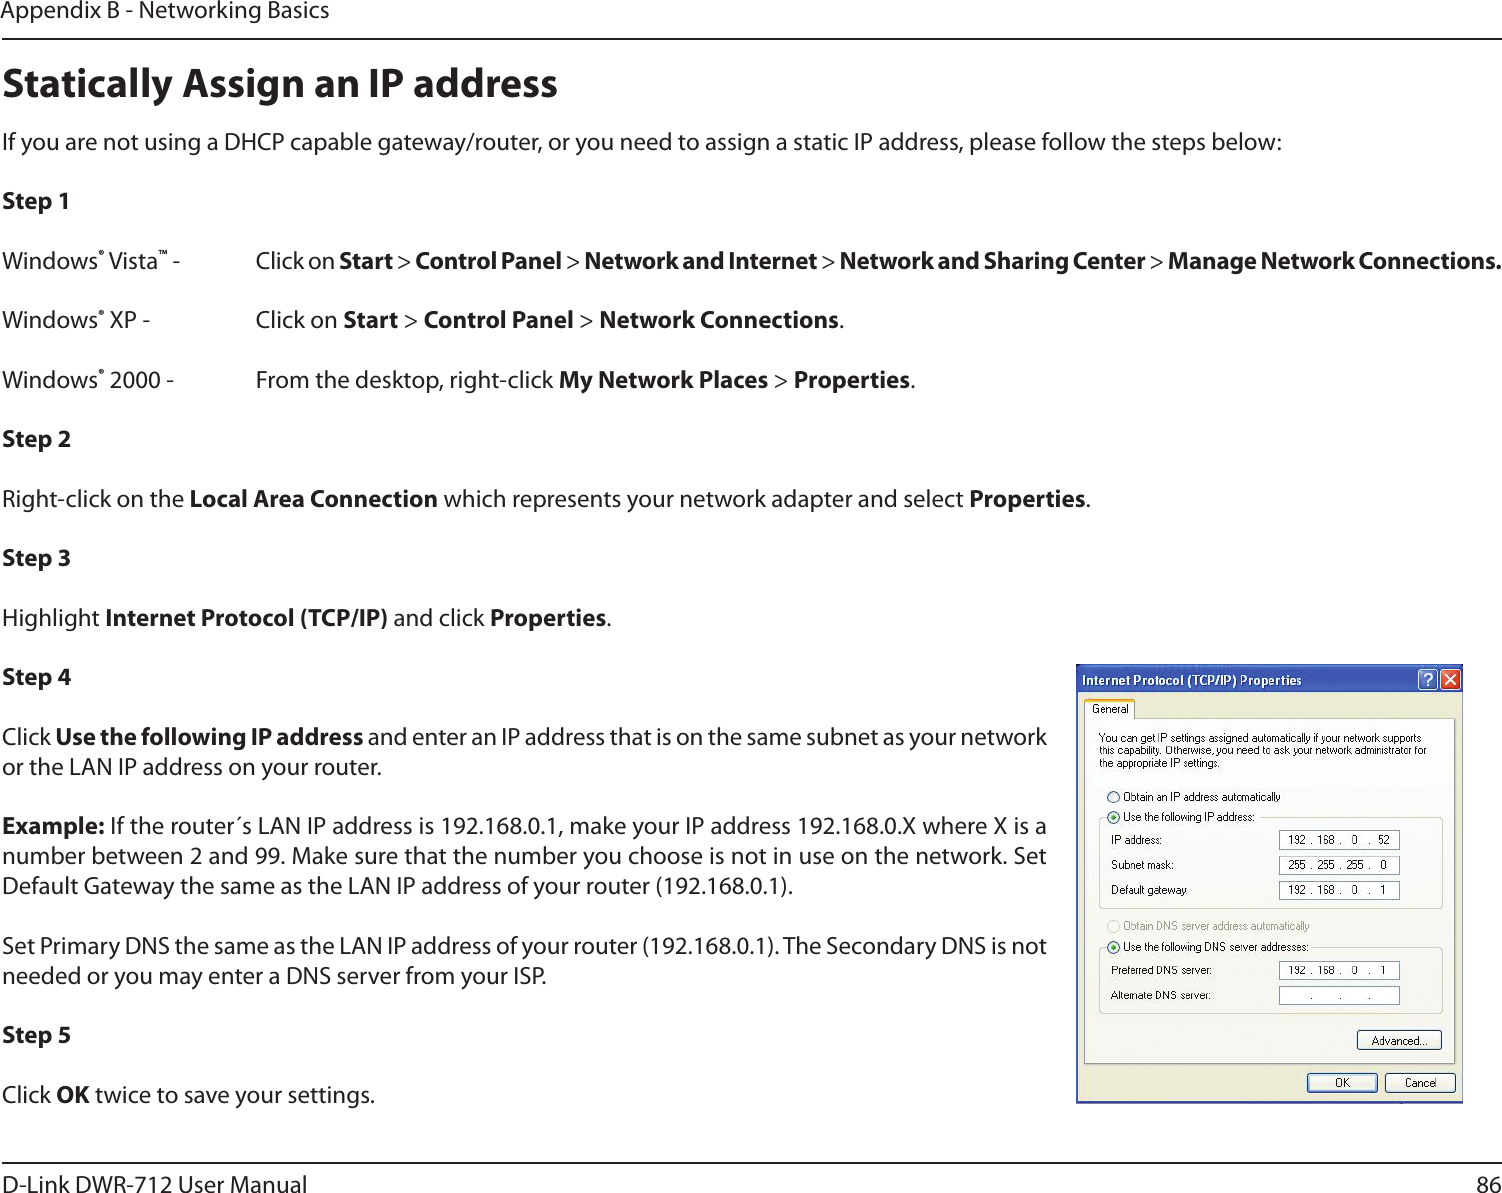 86D-Link DWR-712 User ManualAppendix B - Networking BasicsStatically Assign an IP addressIf you are not using a DHCP capable gateway/router, or you need to assign a static IP address, please follow the steps below:Step 1Windows® Vista™ -  Click on Start &gt; Control Panel &gt; Network and Internet &gt; Network and Sharing Center &gt; Manage Network Connections.Windows® XP -  Click on Start &gt; Control Panel &gt; Network Connections.Windows® 2000 -  From the desktop, right-click My Network Places &gt; Properties.Step 2Right-click on the Local Area Connection which represents your network adapter and select Properties.Step 3Highlight Internet Protocol (TCP/IP) and click Properties.Step 4Click Use the following IP address and enter an IP address that is on the same subnet as your network or the LAN IP address on your router. Example: If the router´s LAN IP address is 192.168.0.1, make your IP address 192.168.0.X where X is a number between 2 and 99. Make sure that the number you choose is not in use on the network. Set Default Gateway the same as the LAN IP address of your router (192.168.0.1). Set Primary DNS the same as the LAN IP address of your router (192.168.0.1). The Secondary DNS is not needed or you may enter a DNS server from your ISP.Step 5Click OK twice to save your settings.